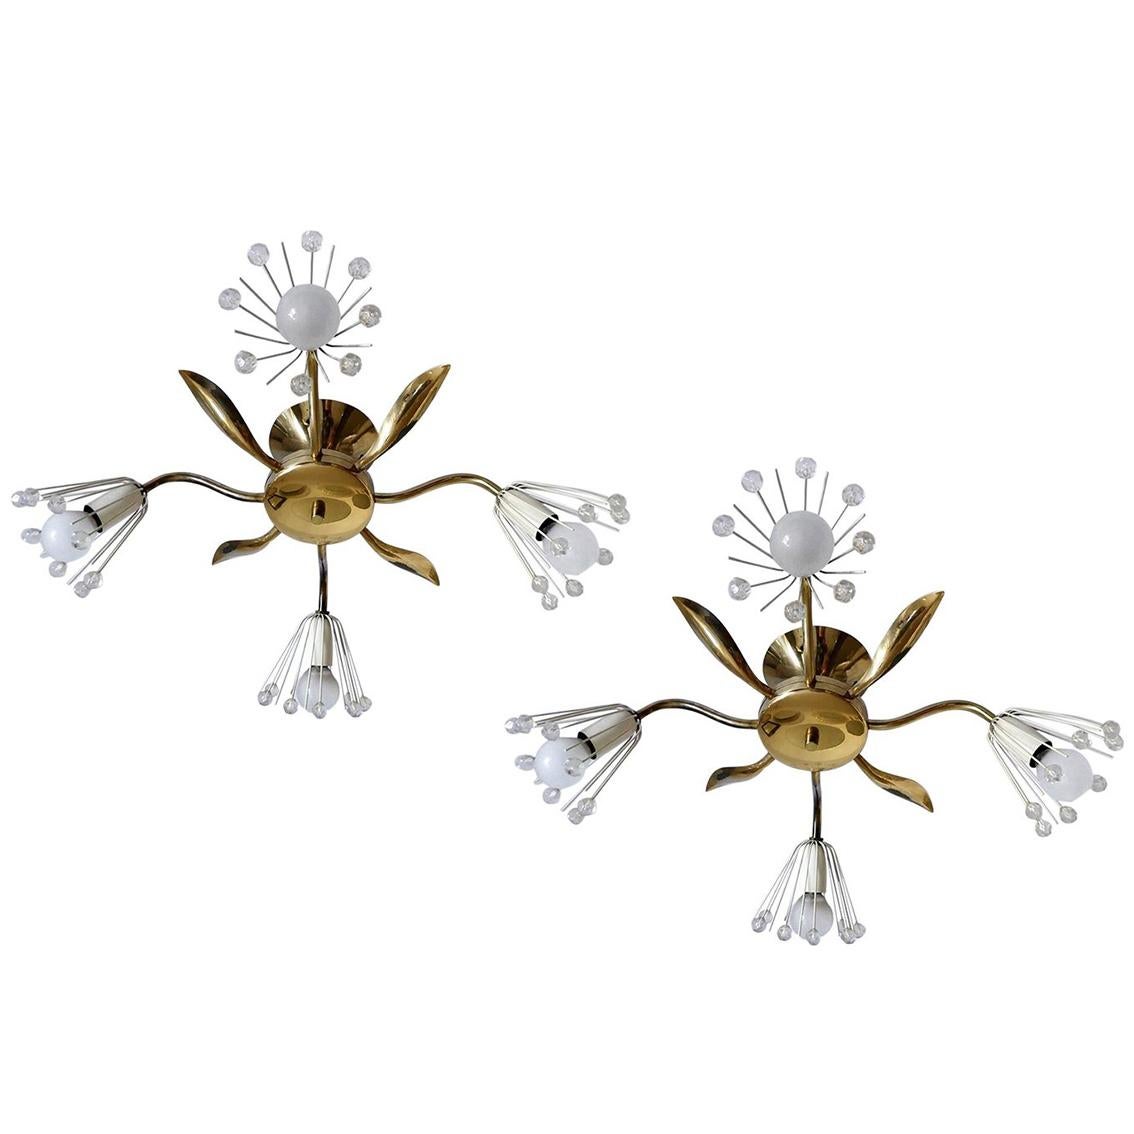 Pair of Austrian Vintage Wall or Ceiling Lights Flush Mounts Chandeliers, 1950s For Sale